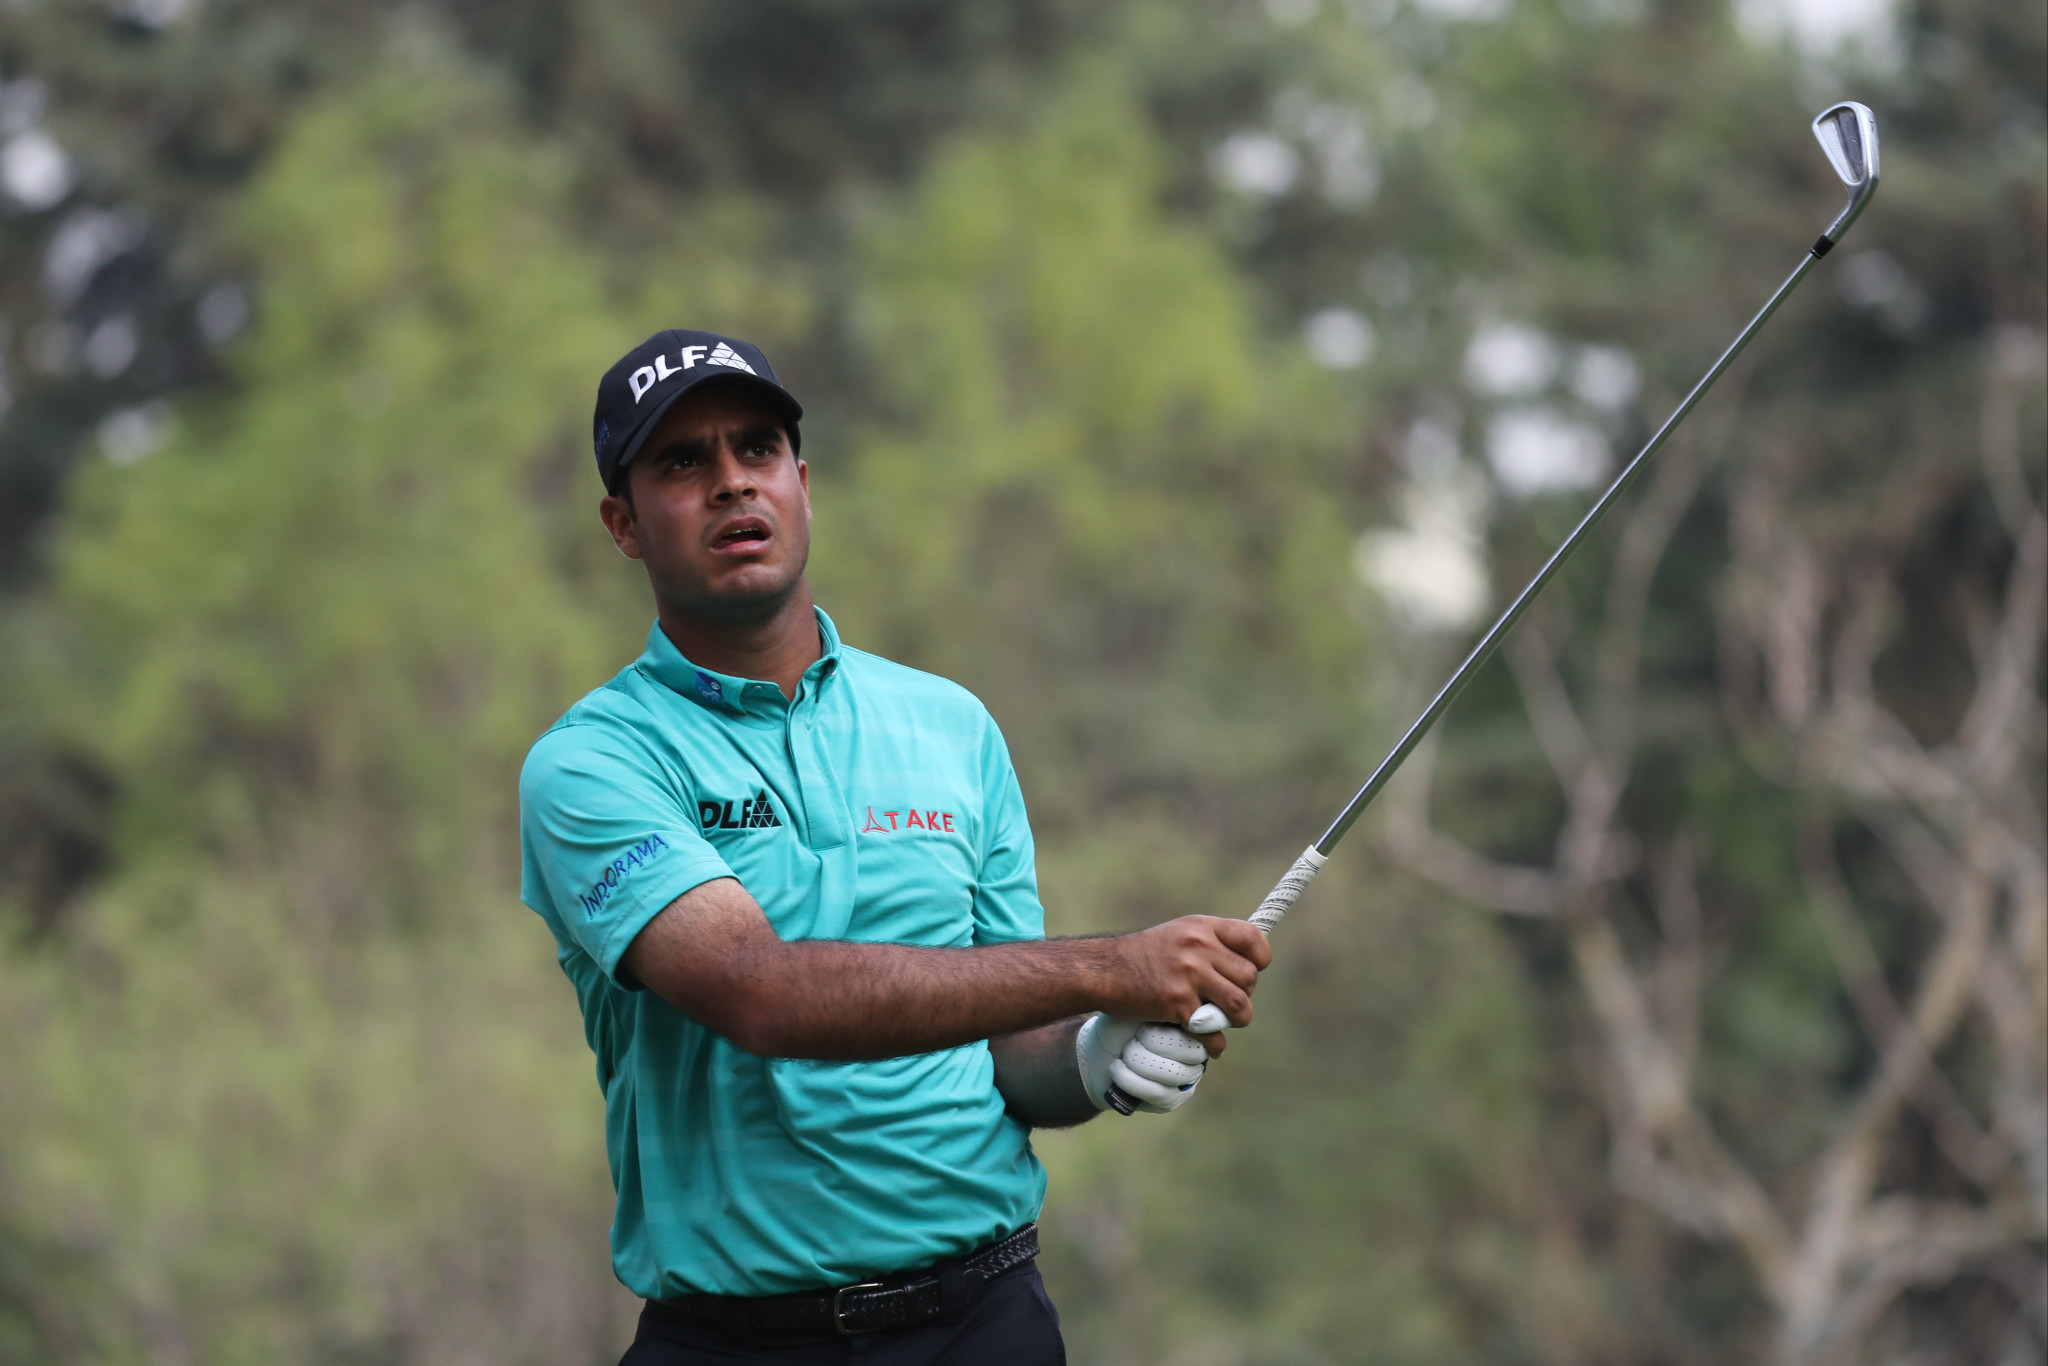 Debutant Sharma moves into lead at halfway stage of World Golf Championship in Mexico